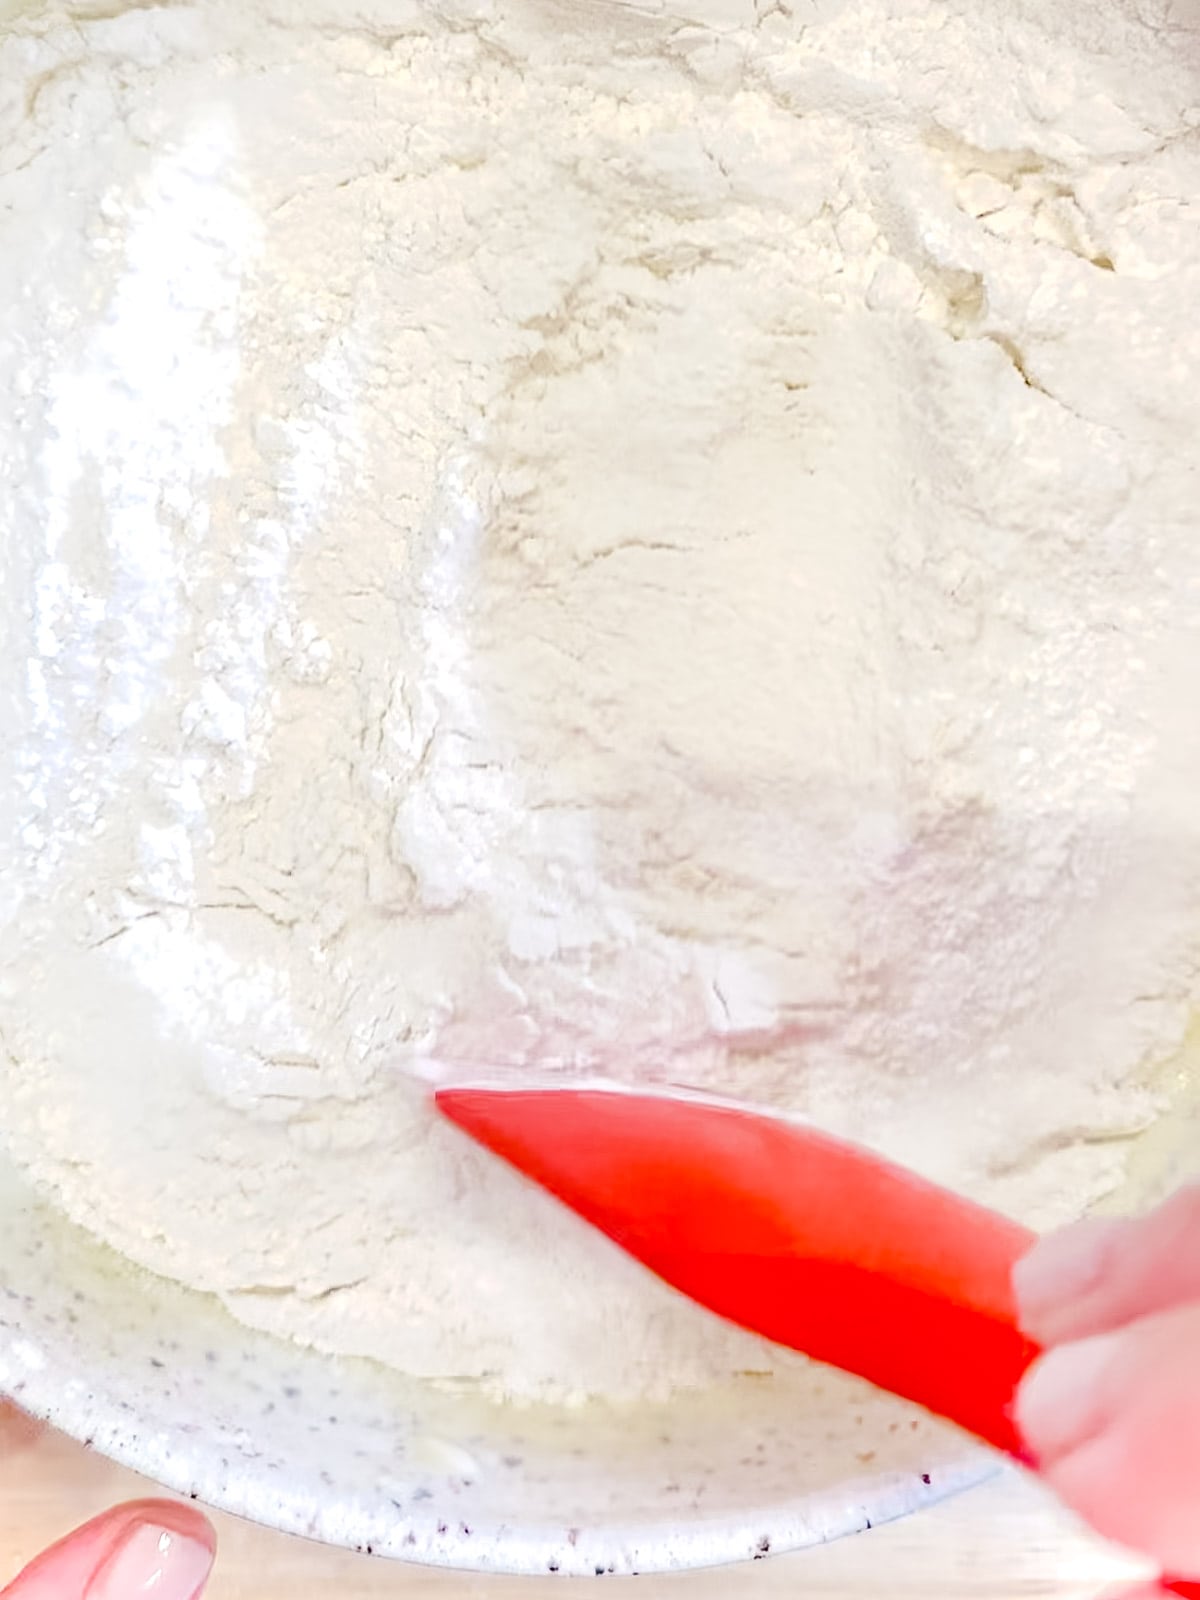 Using a silicone spatula to lightly mix dry ingredients on top of the wet ingredients.